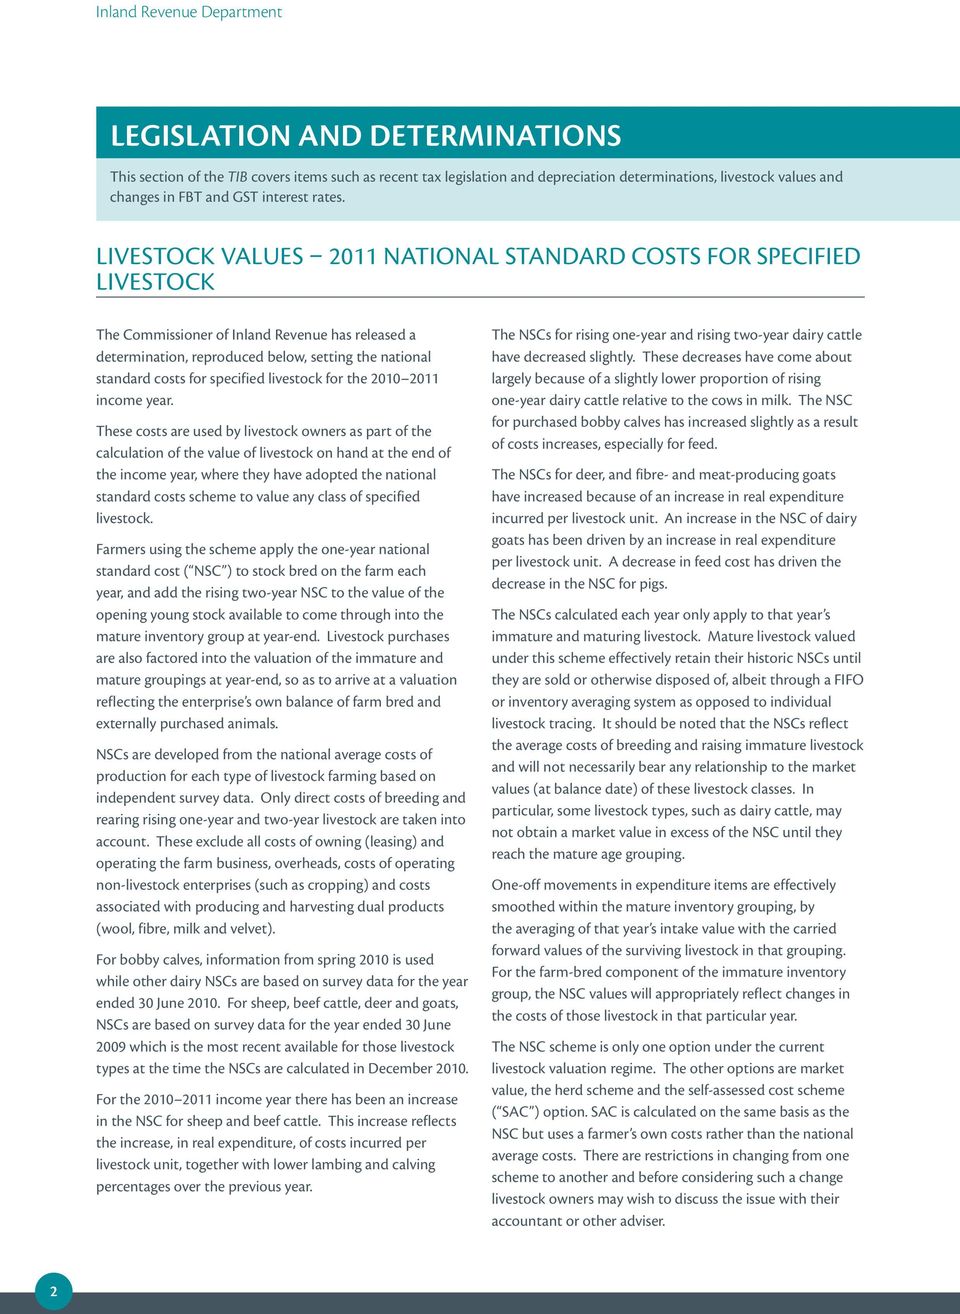 LIVESTOCK VALUES 2011 NATIONAL STANDARD COSTS FOR SPECIFIED LIVESTOCK The Commissioner of Inland Revenue has released a determination, reproduced below, setting the national standard costs for